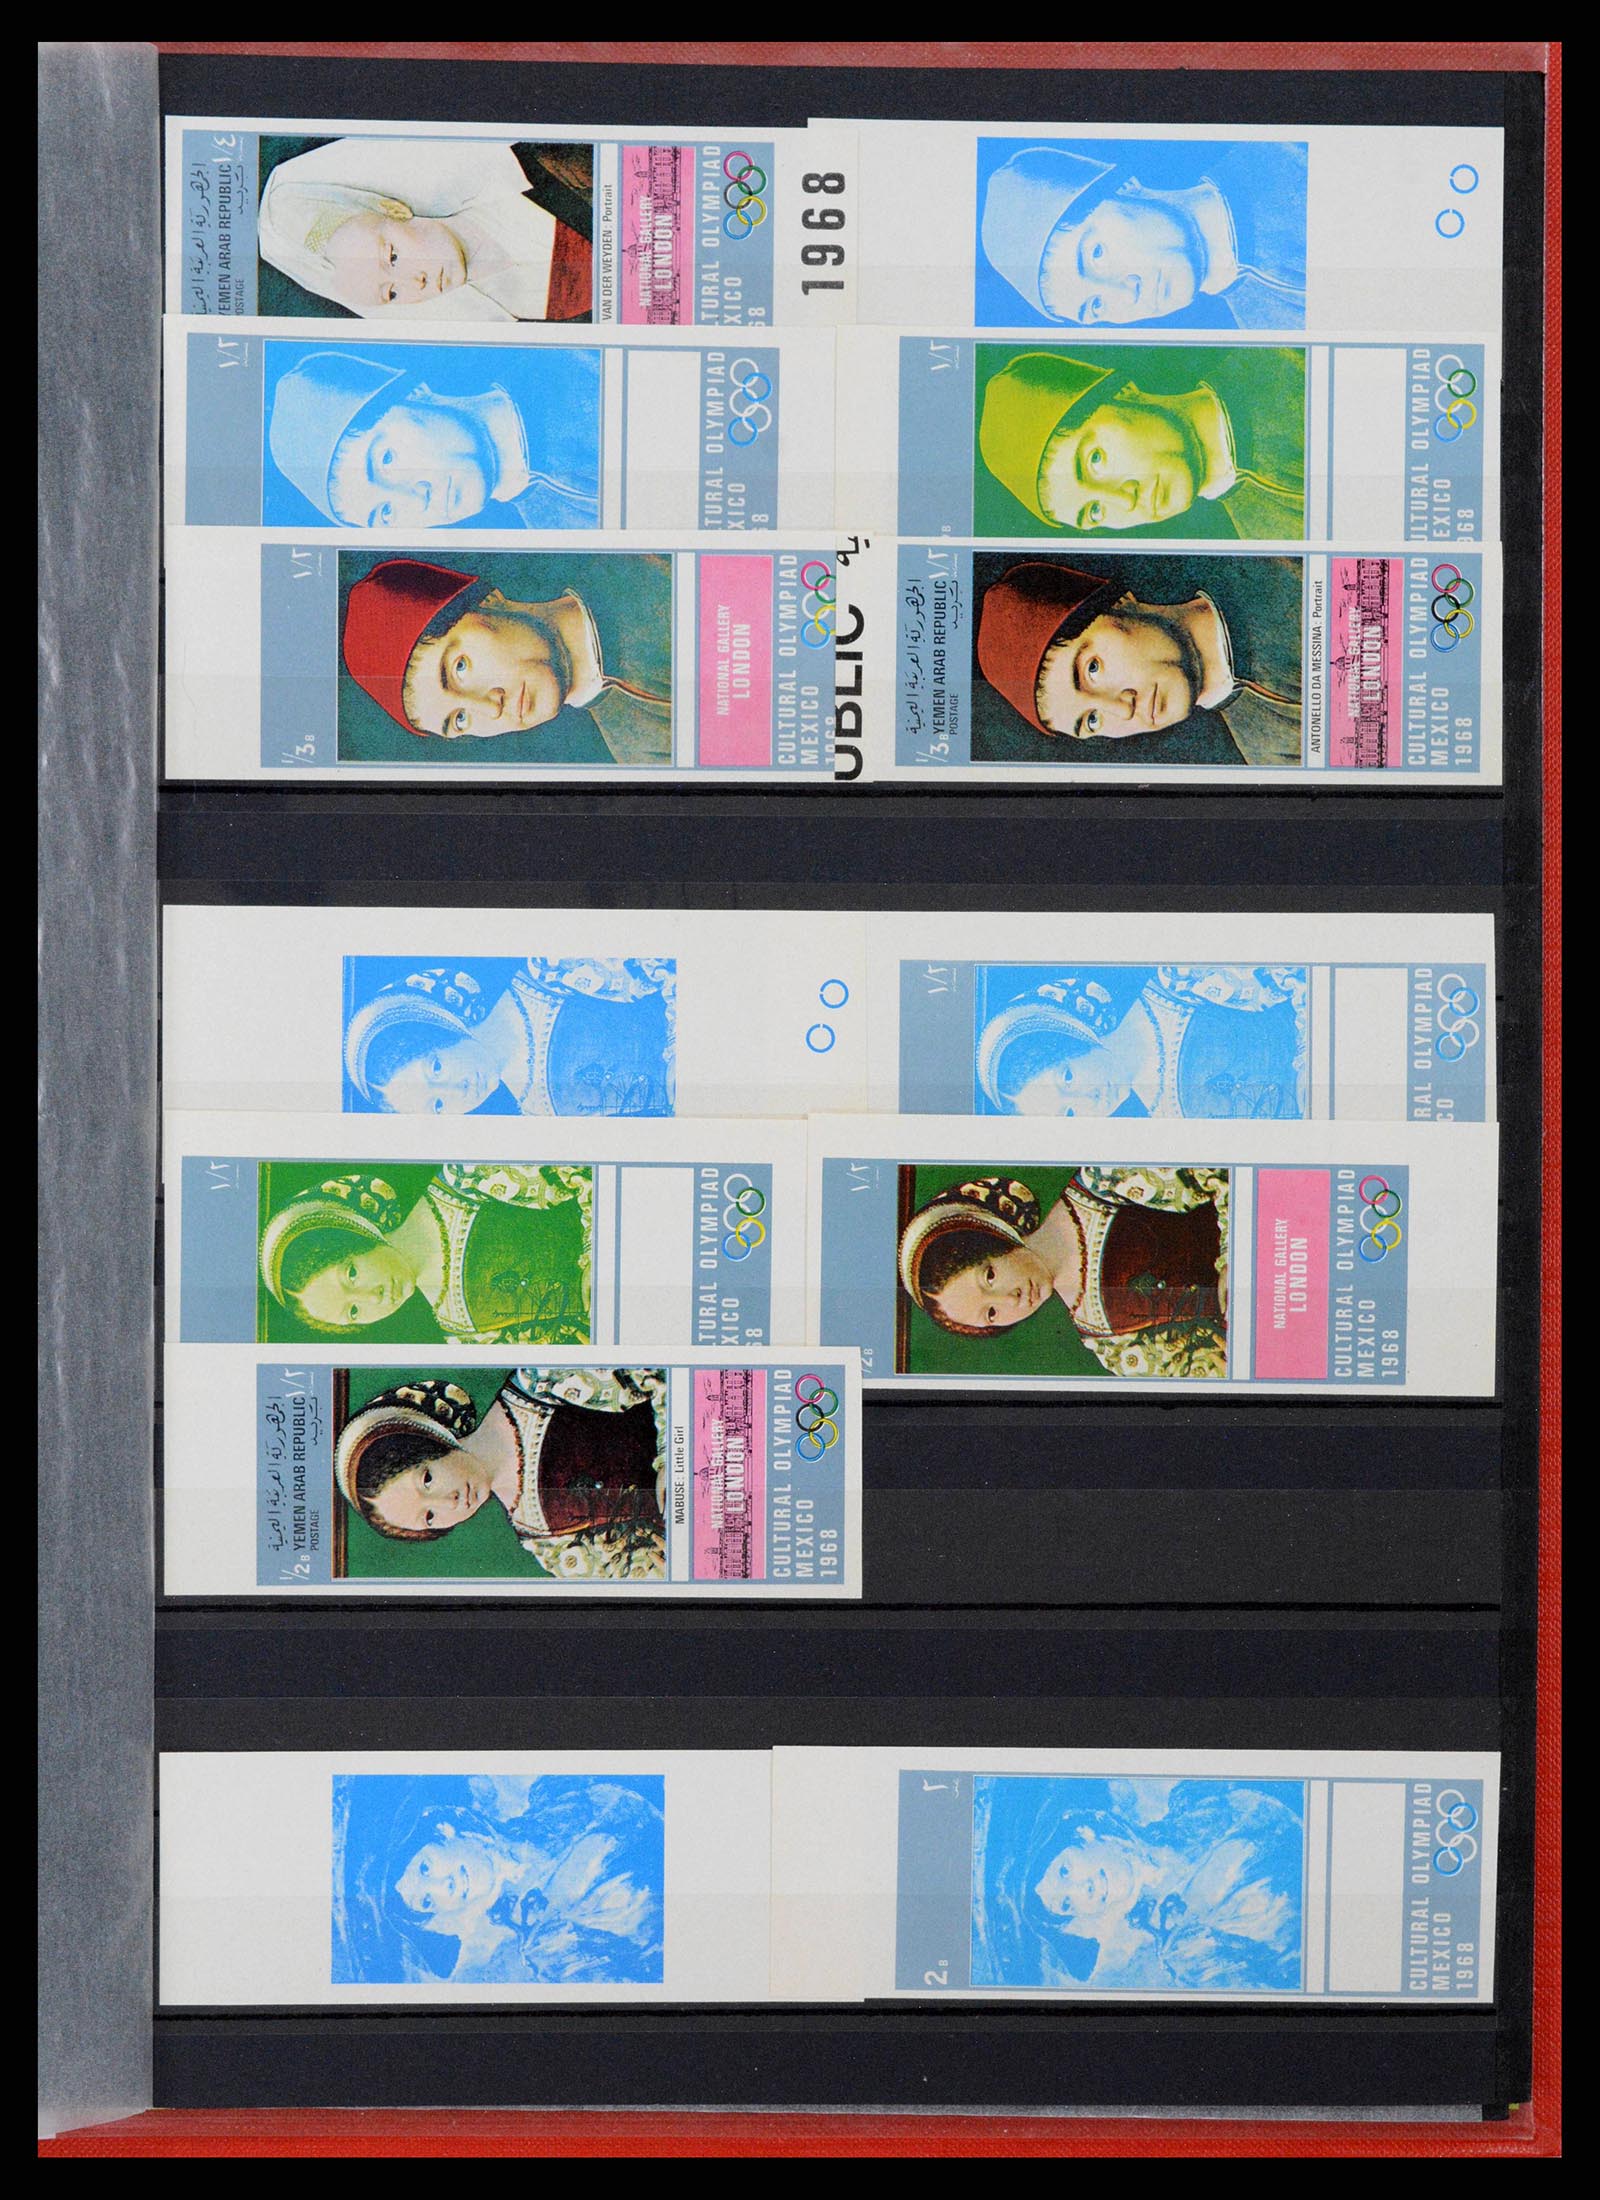 38111 0030 - Stamp collection 38111 Yemen proofs 1968-1973.